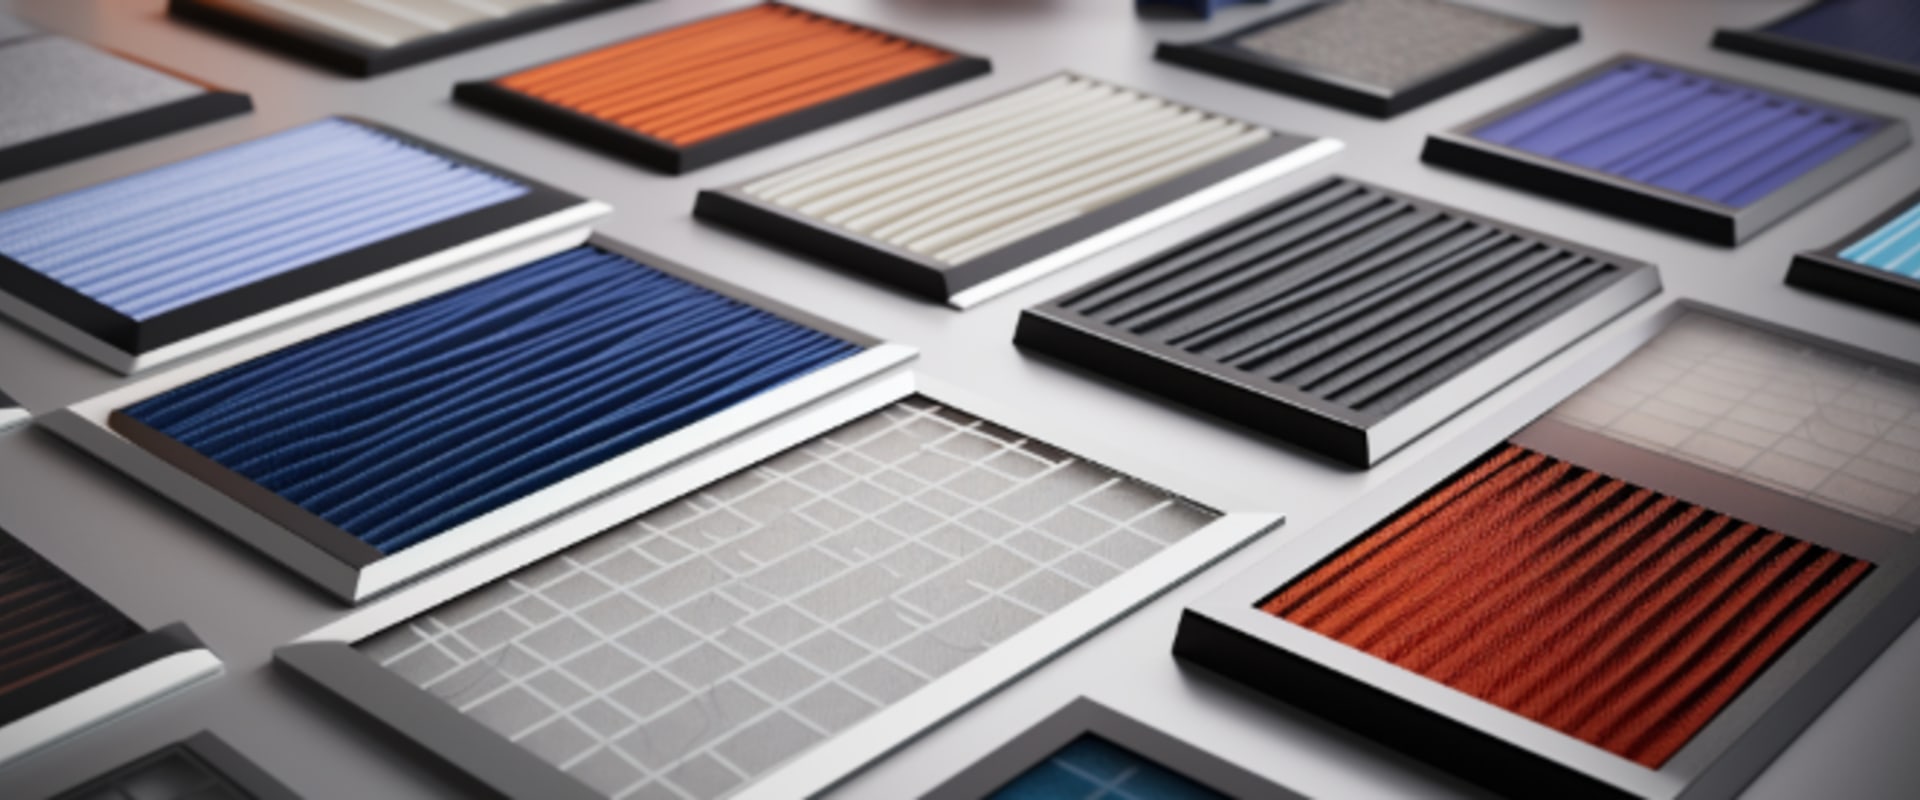 Upgrade Your Home's HVAC Filters To 16x24x1 For Better Air Quality